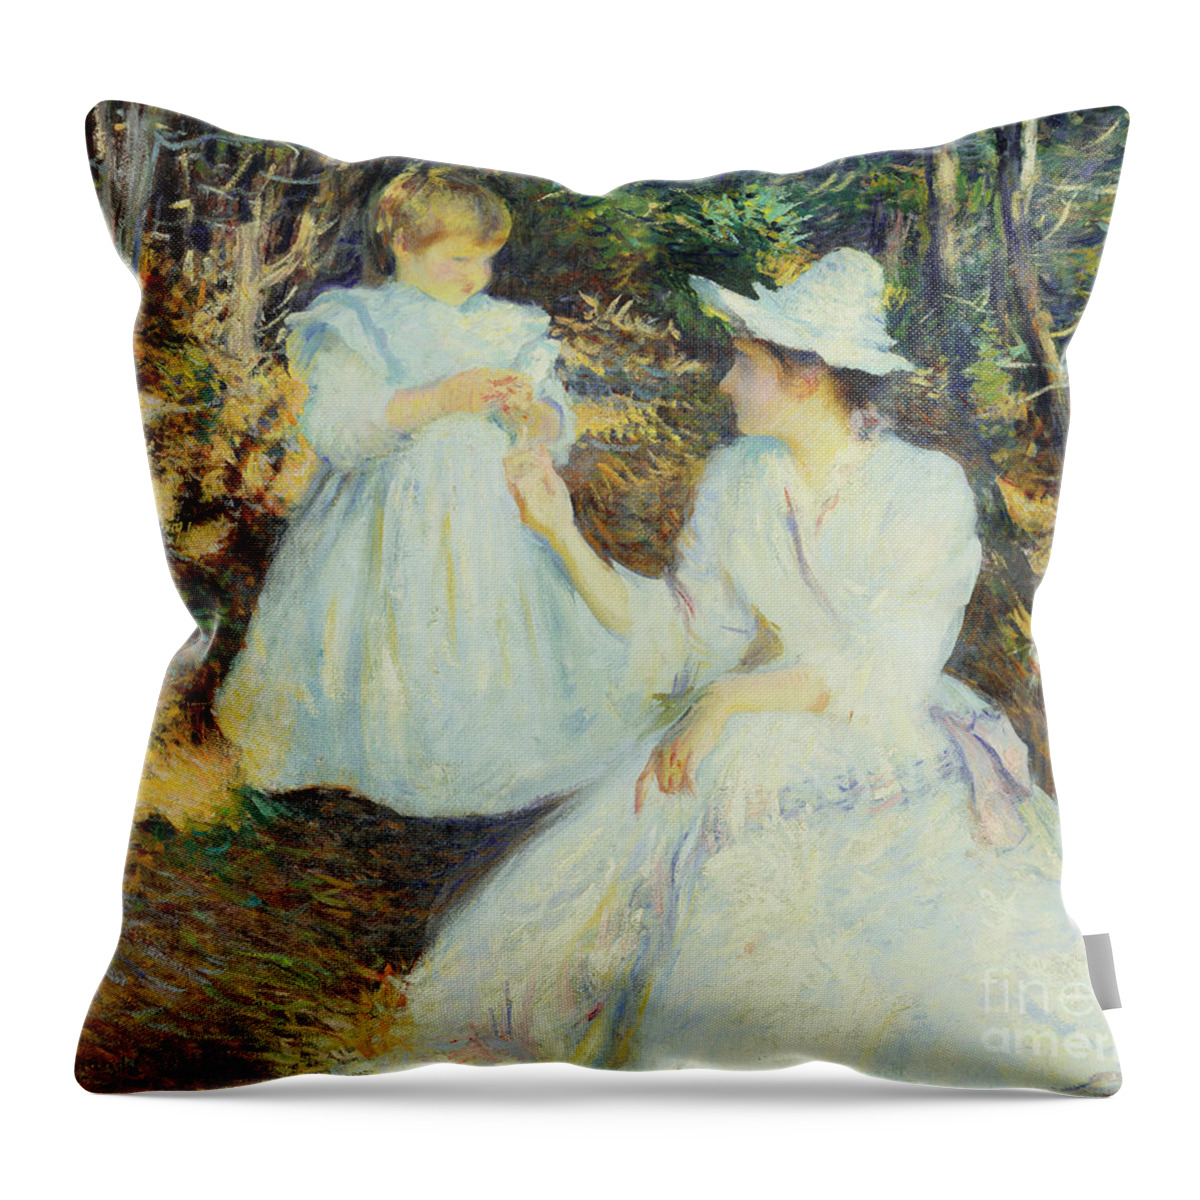 Wood (material) Throw Pillow featuring the painting Mother And Child In Pine Woods by Edmund Charles Tarbell